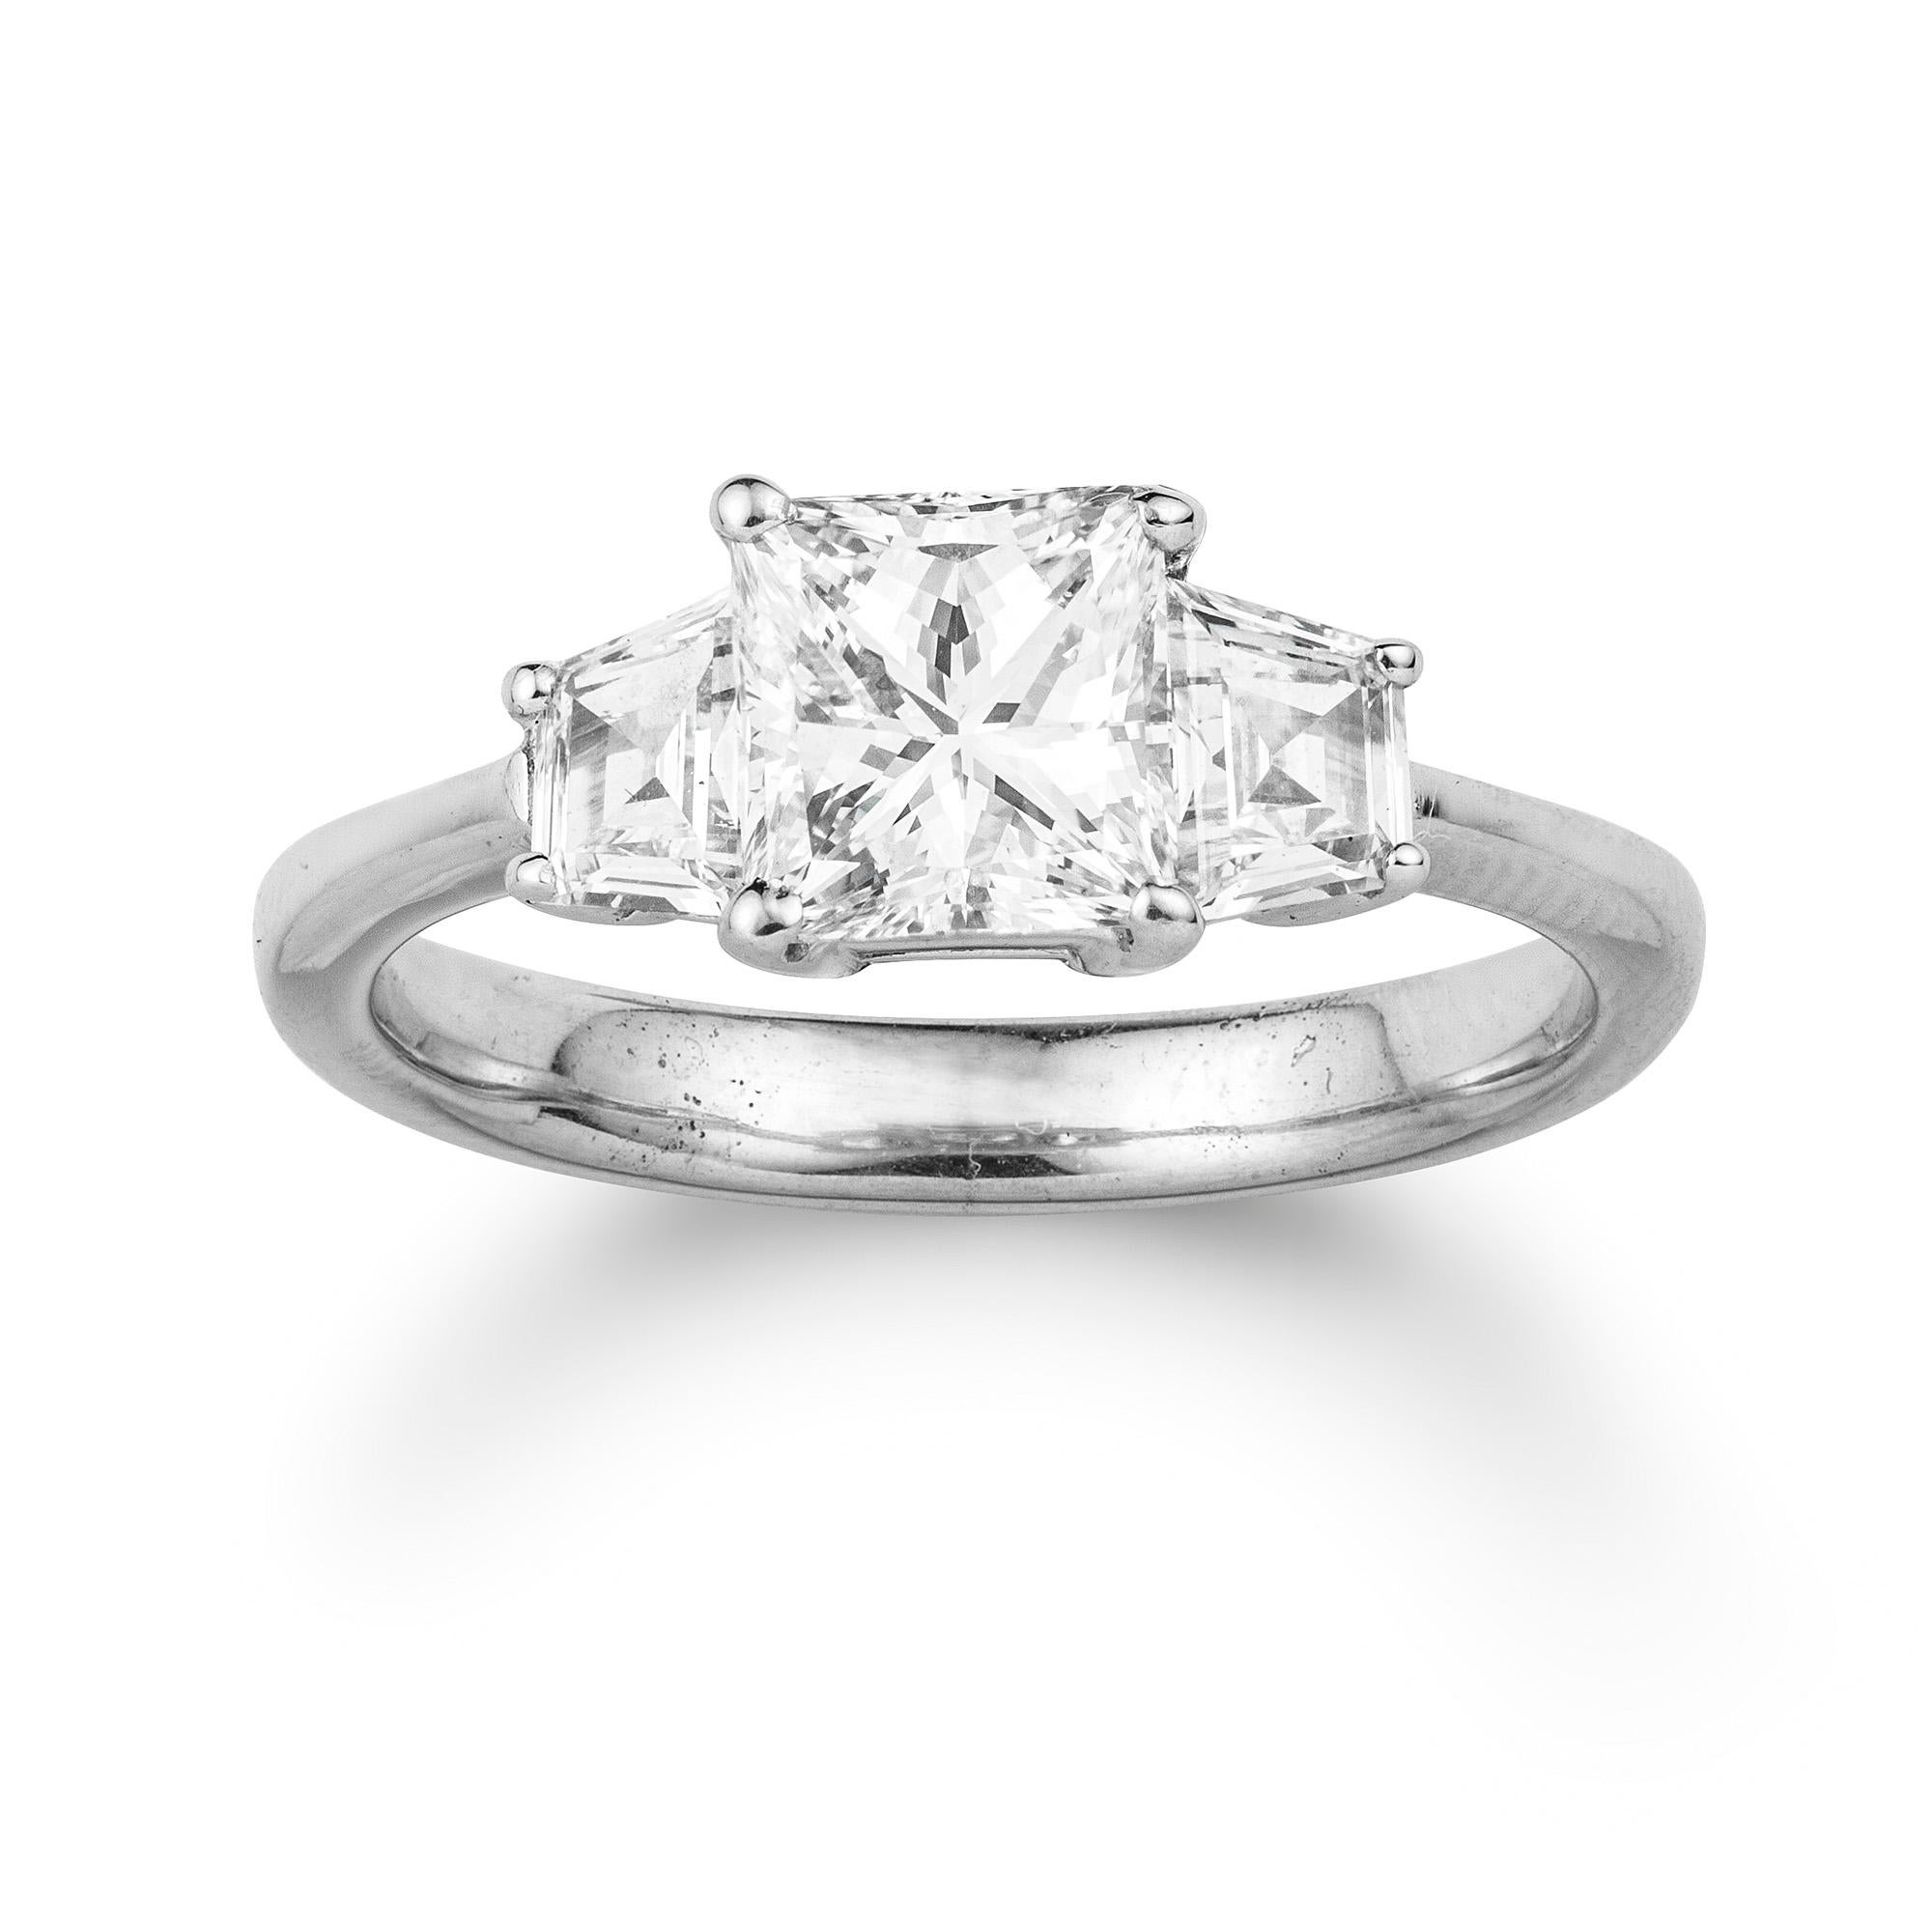 A three stone diamond ring, the centre a princess-cut diamond weighing 1.13 carats accompanied by GCS Report stating to be of H colour and VS1 clarity, claw-set between trapeze-cut diamond-set shoulders weighing a further total of 0.51 carats, to